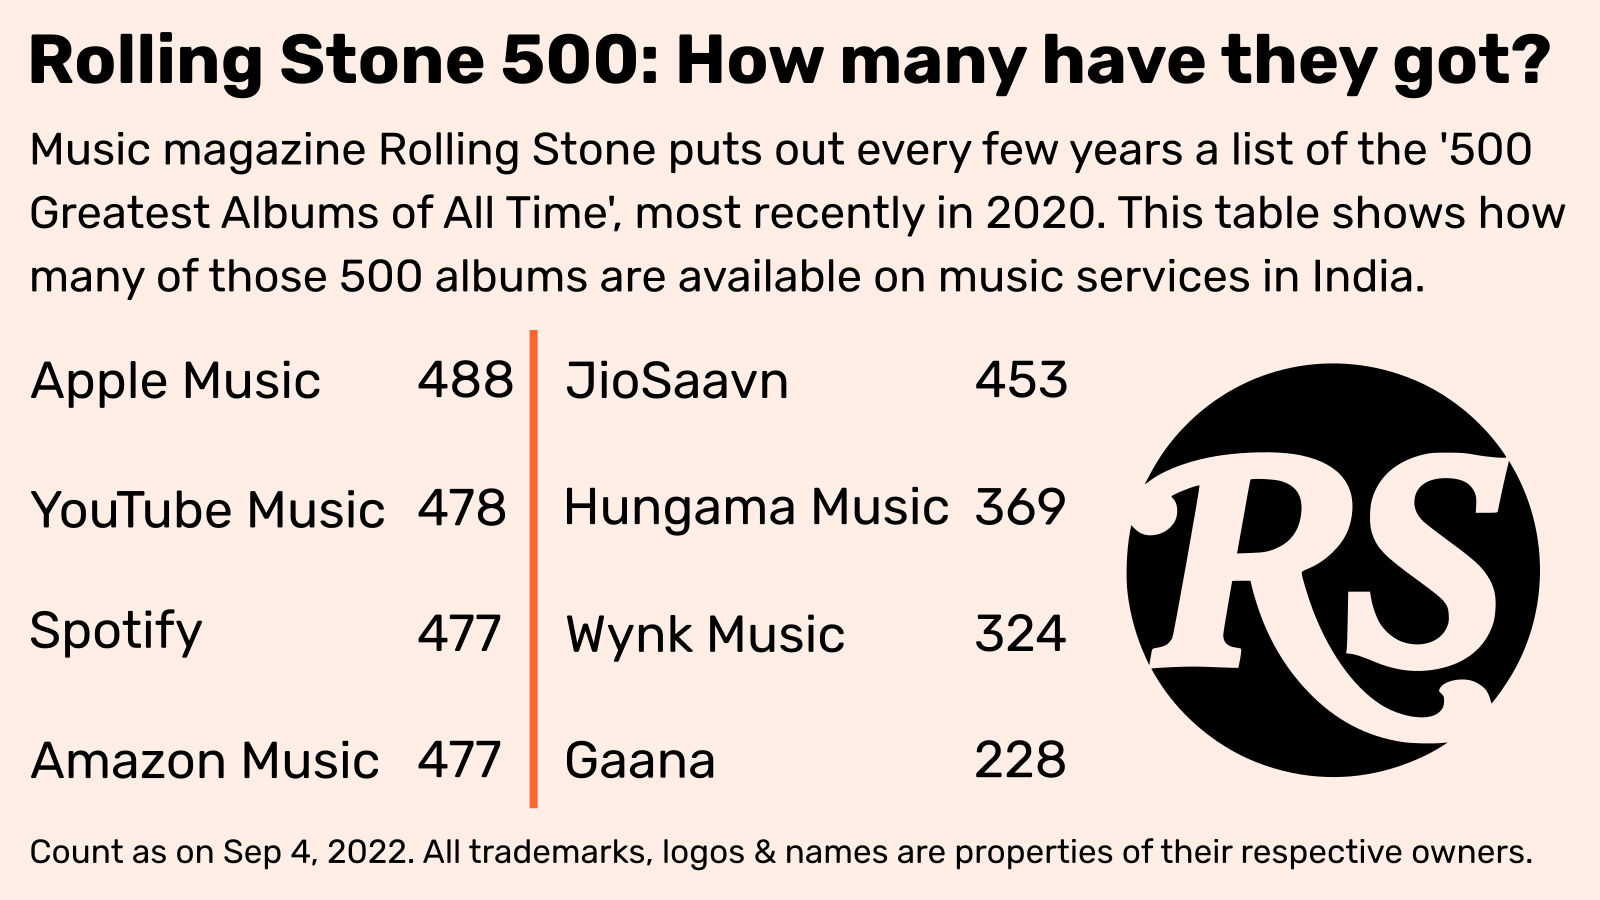 Rolling Stone 500 Count